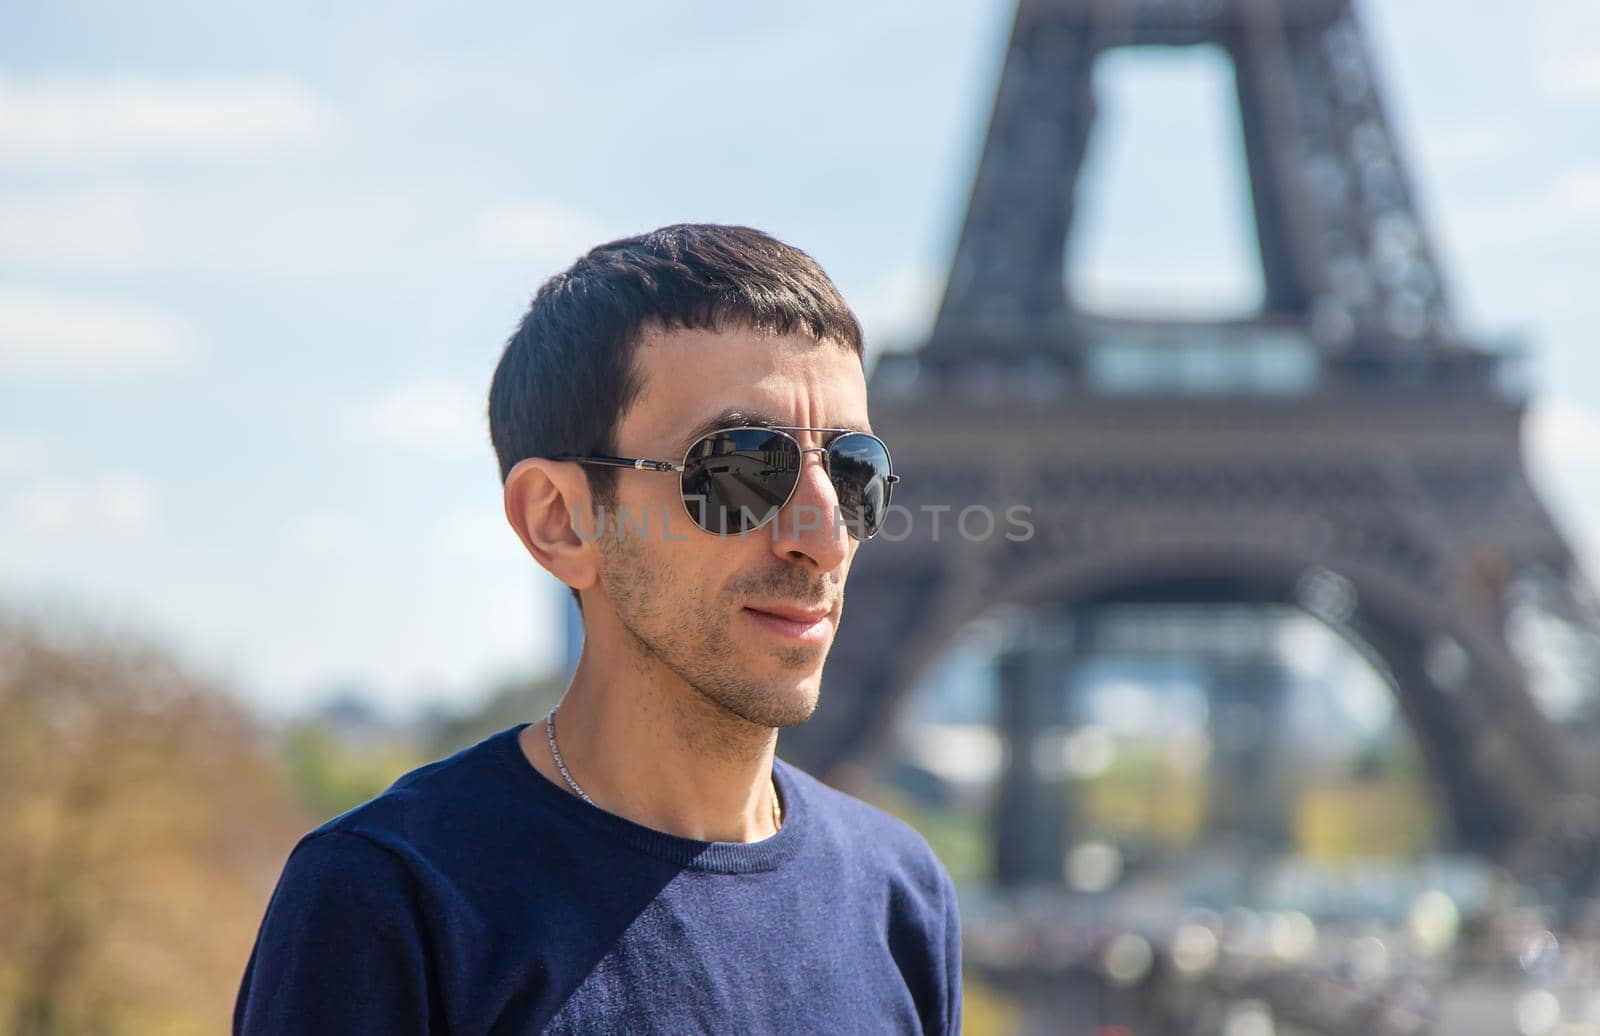 A man near the eiffel tower. Selective focus. People.